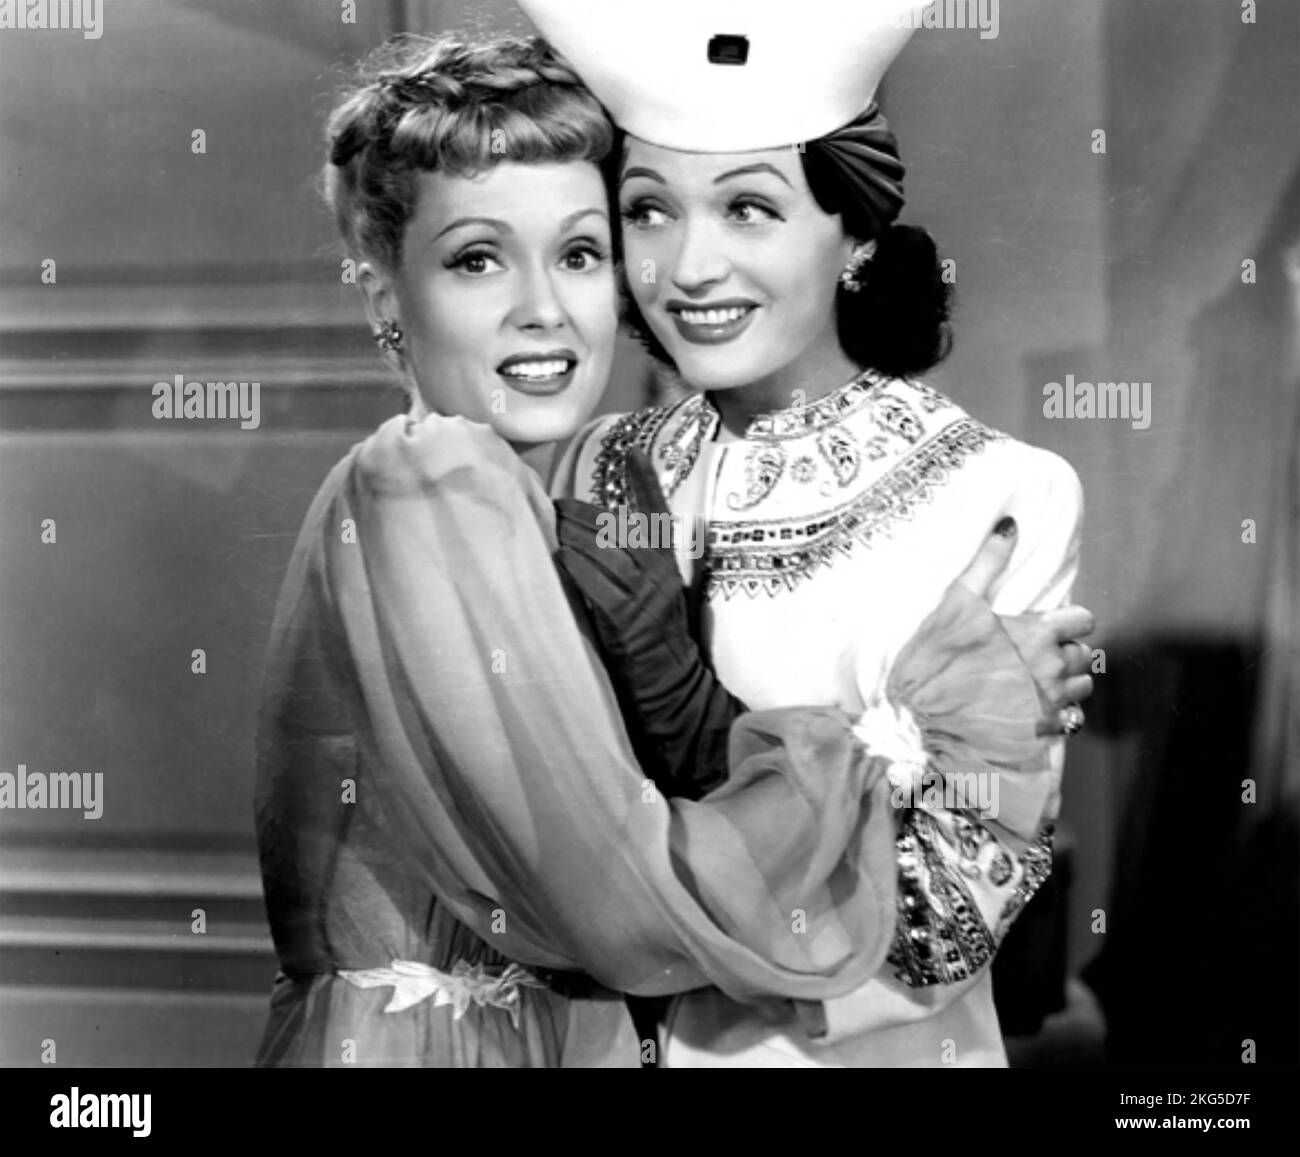 HI DIDDLE DIDDLE 1943 United Artists  film with Pola Negri at right and Martha Scott. AKA Diamonds and Crime. Stock Photo